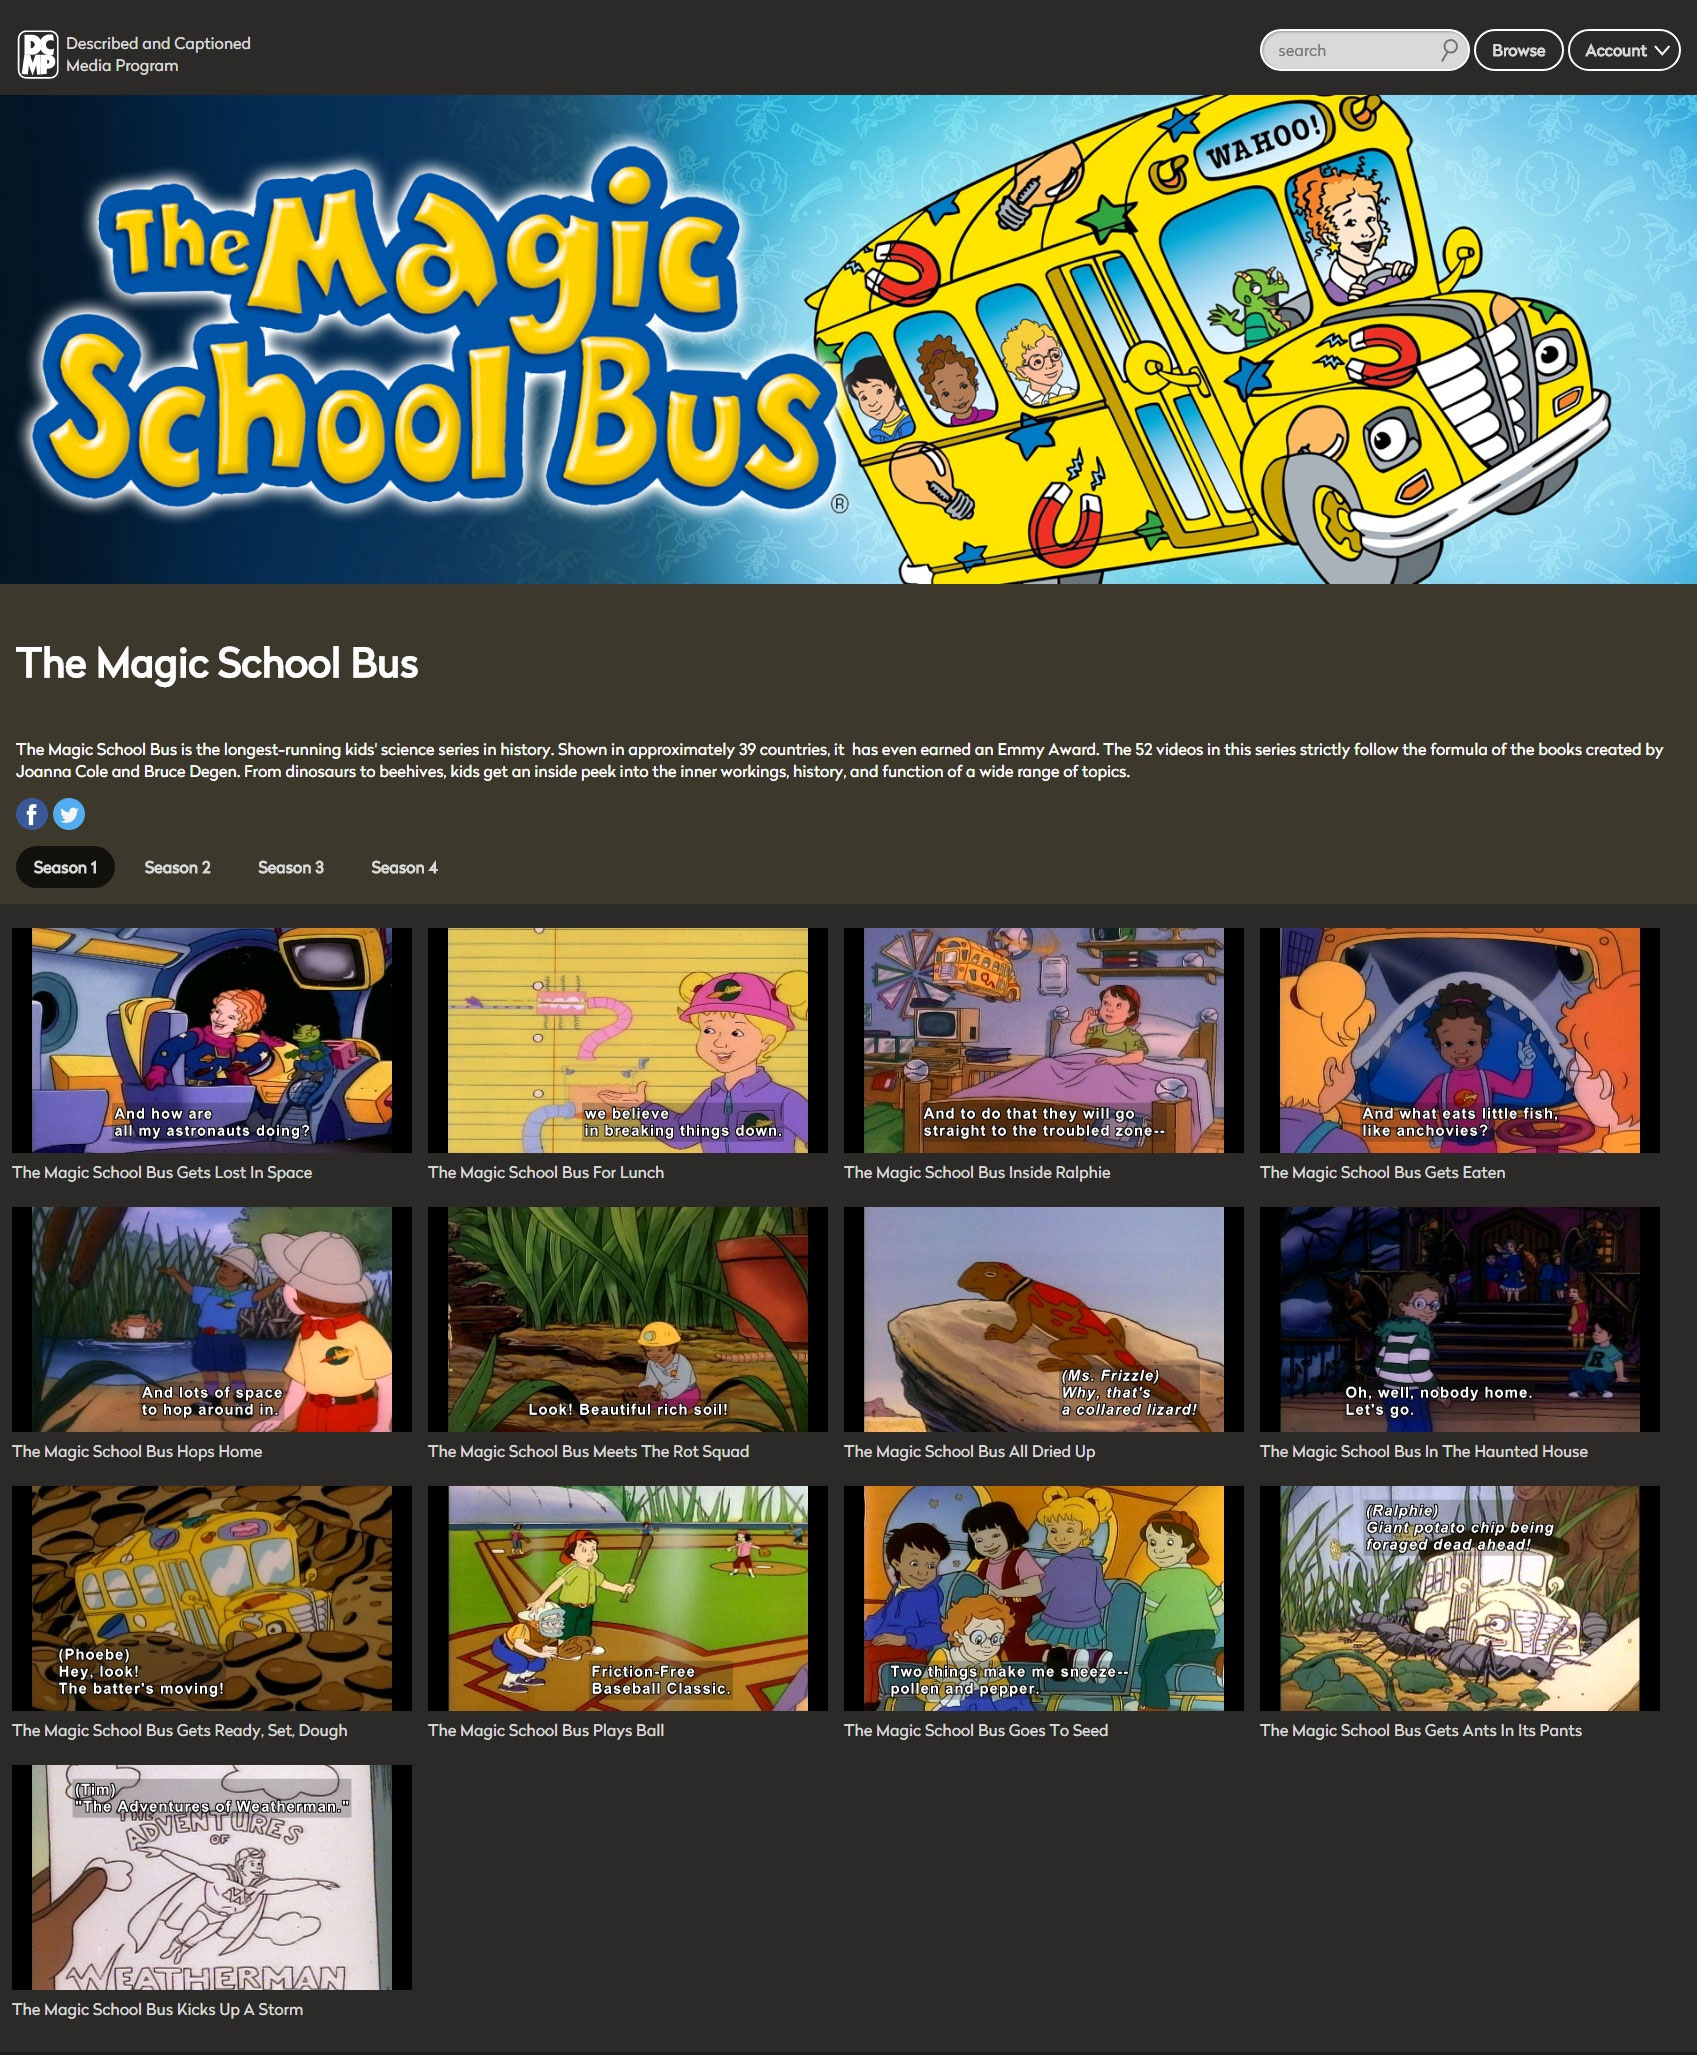 series page for The Magic School Bus shows thumbnail images of all the videos in the series.